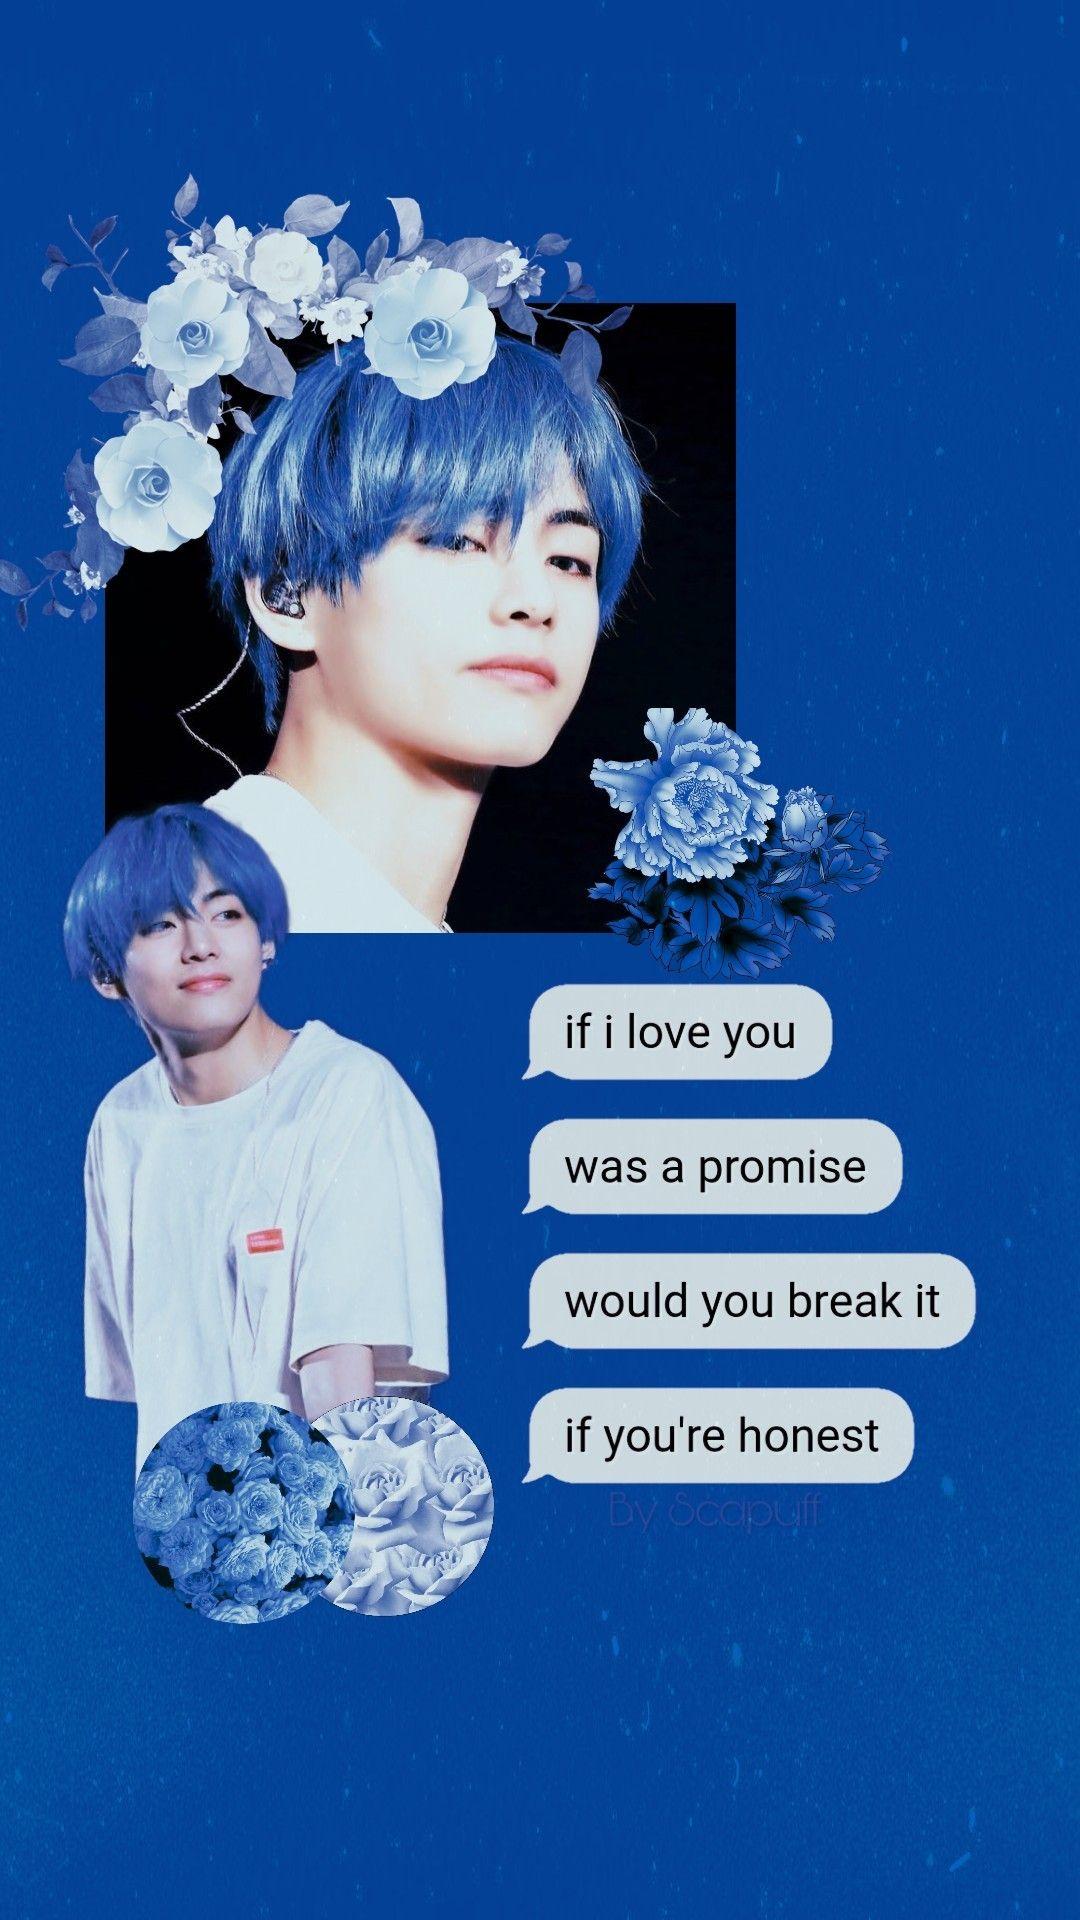  Kim taehyung wallpaper and photos   Images    artcreation on ShareChat